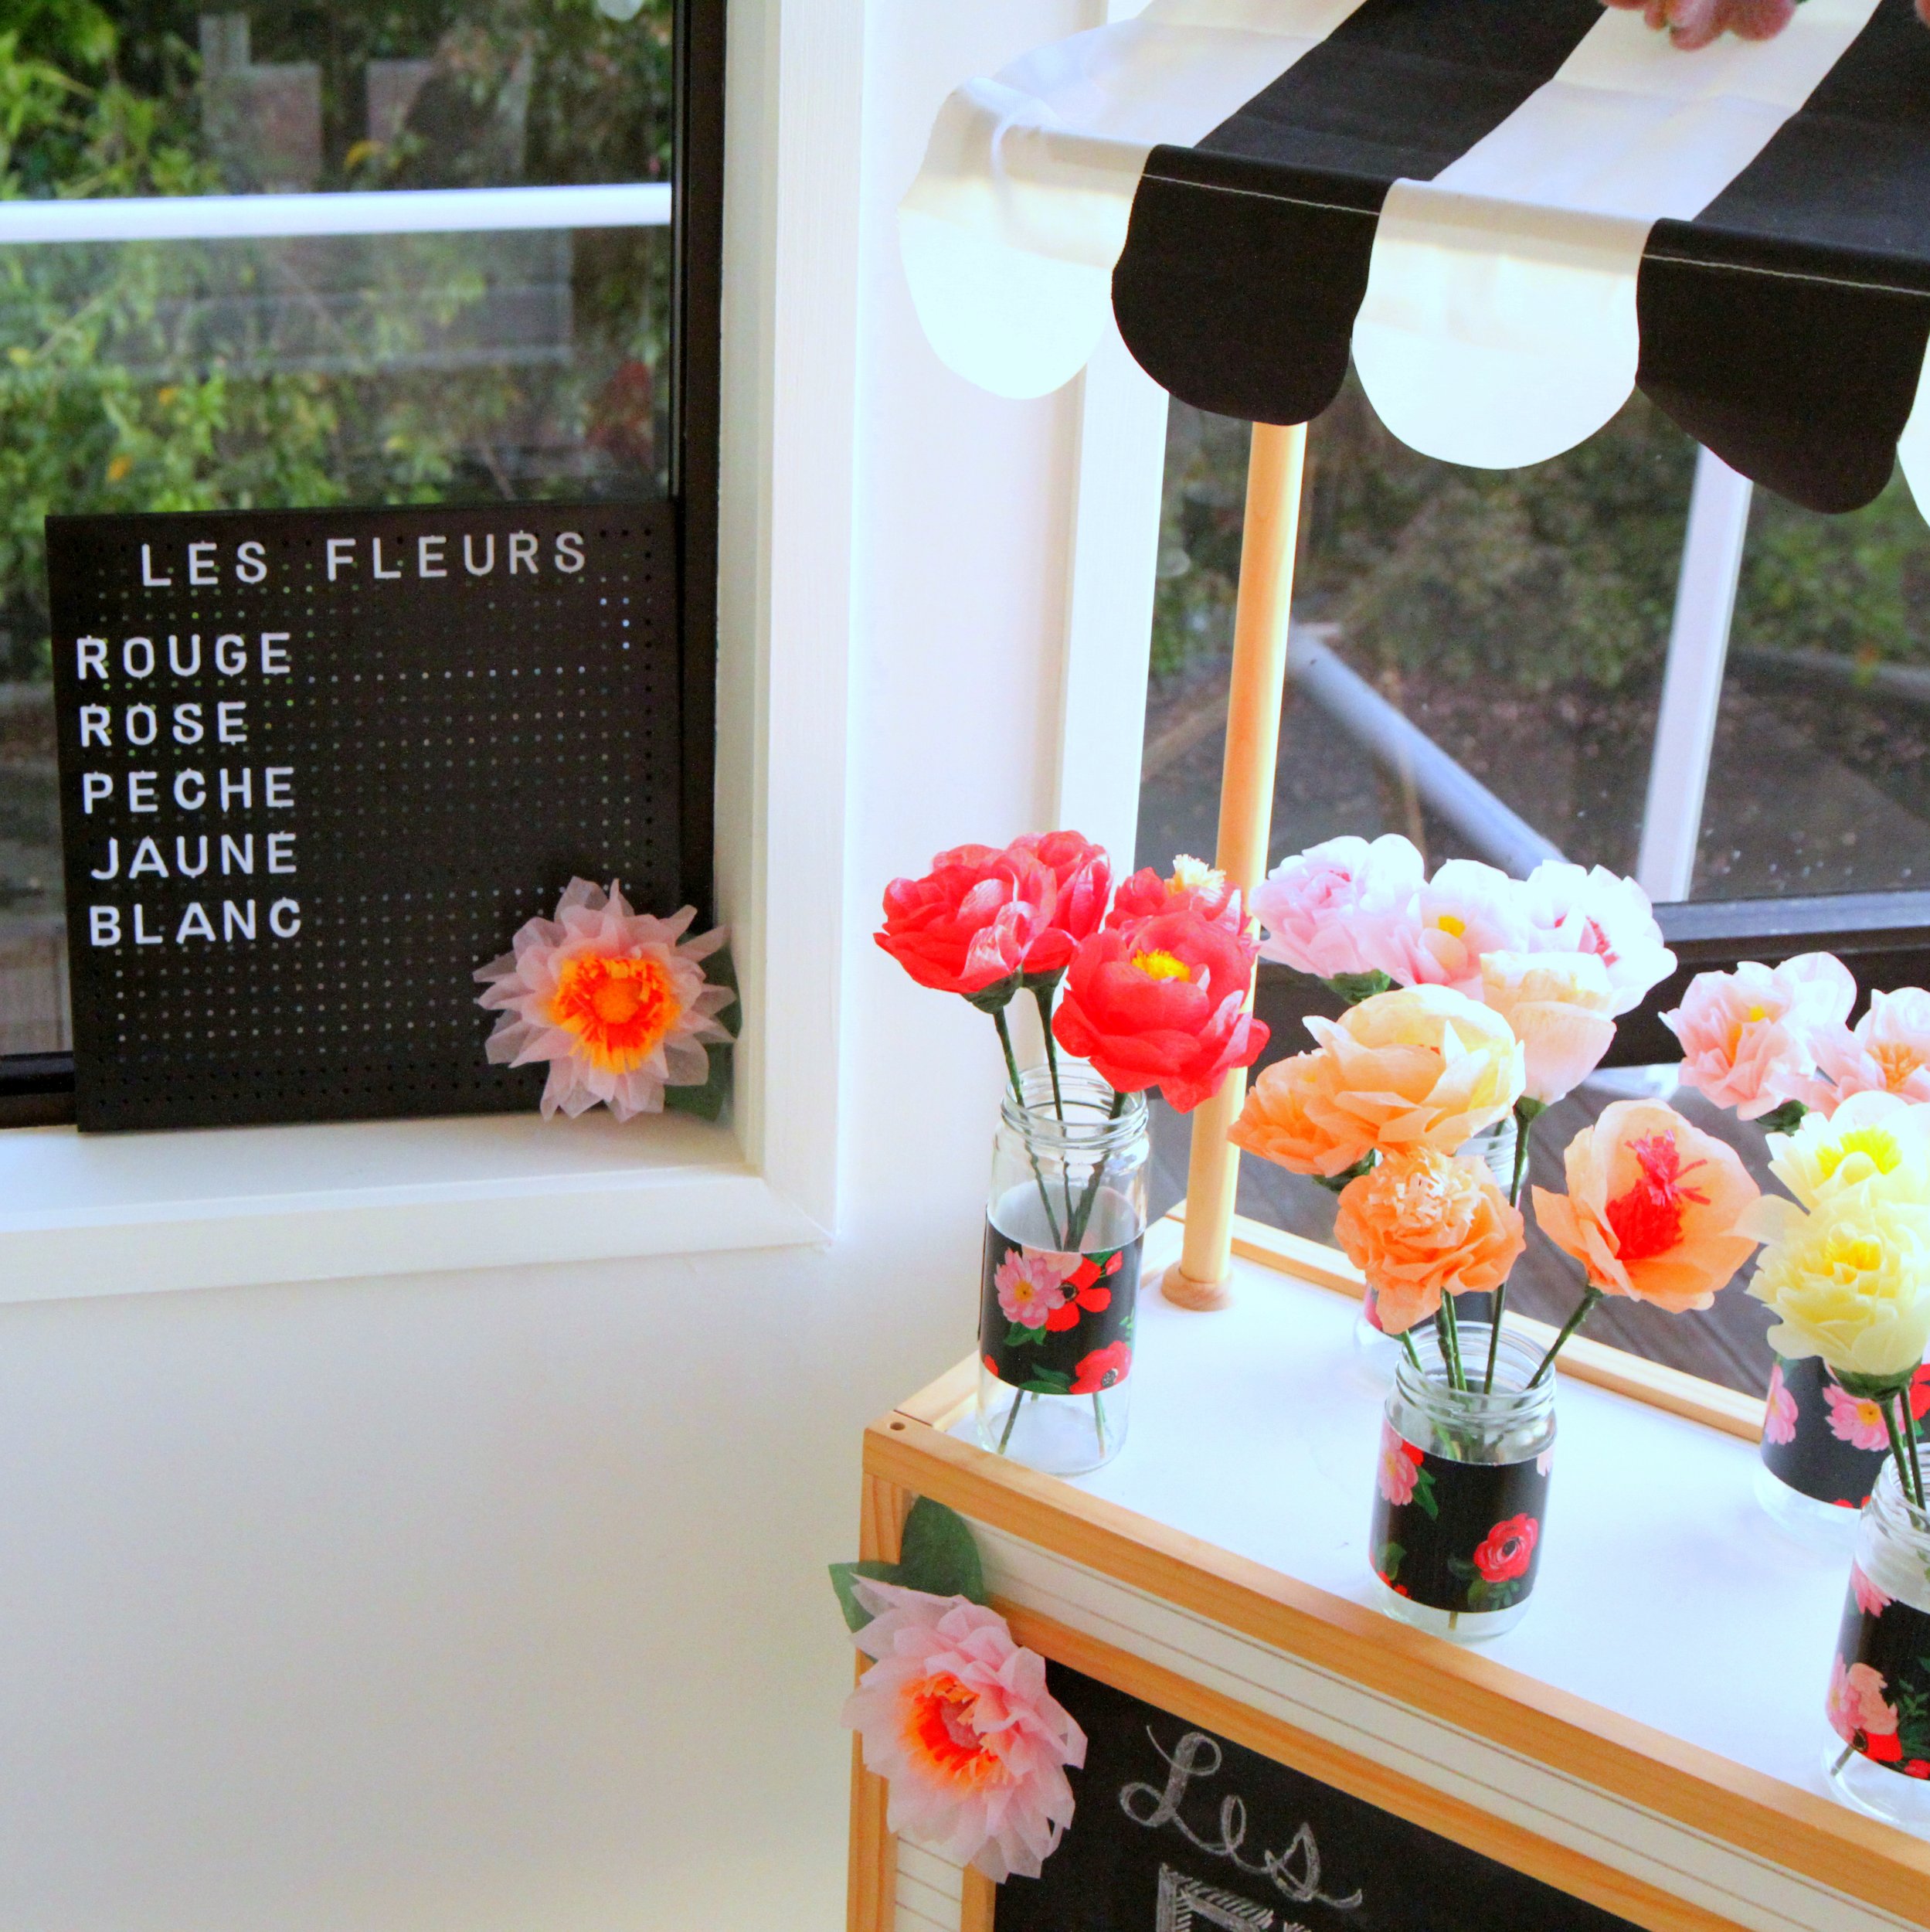 flower bar at a paris themed birthday party